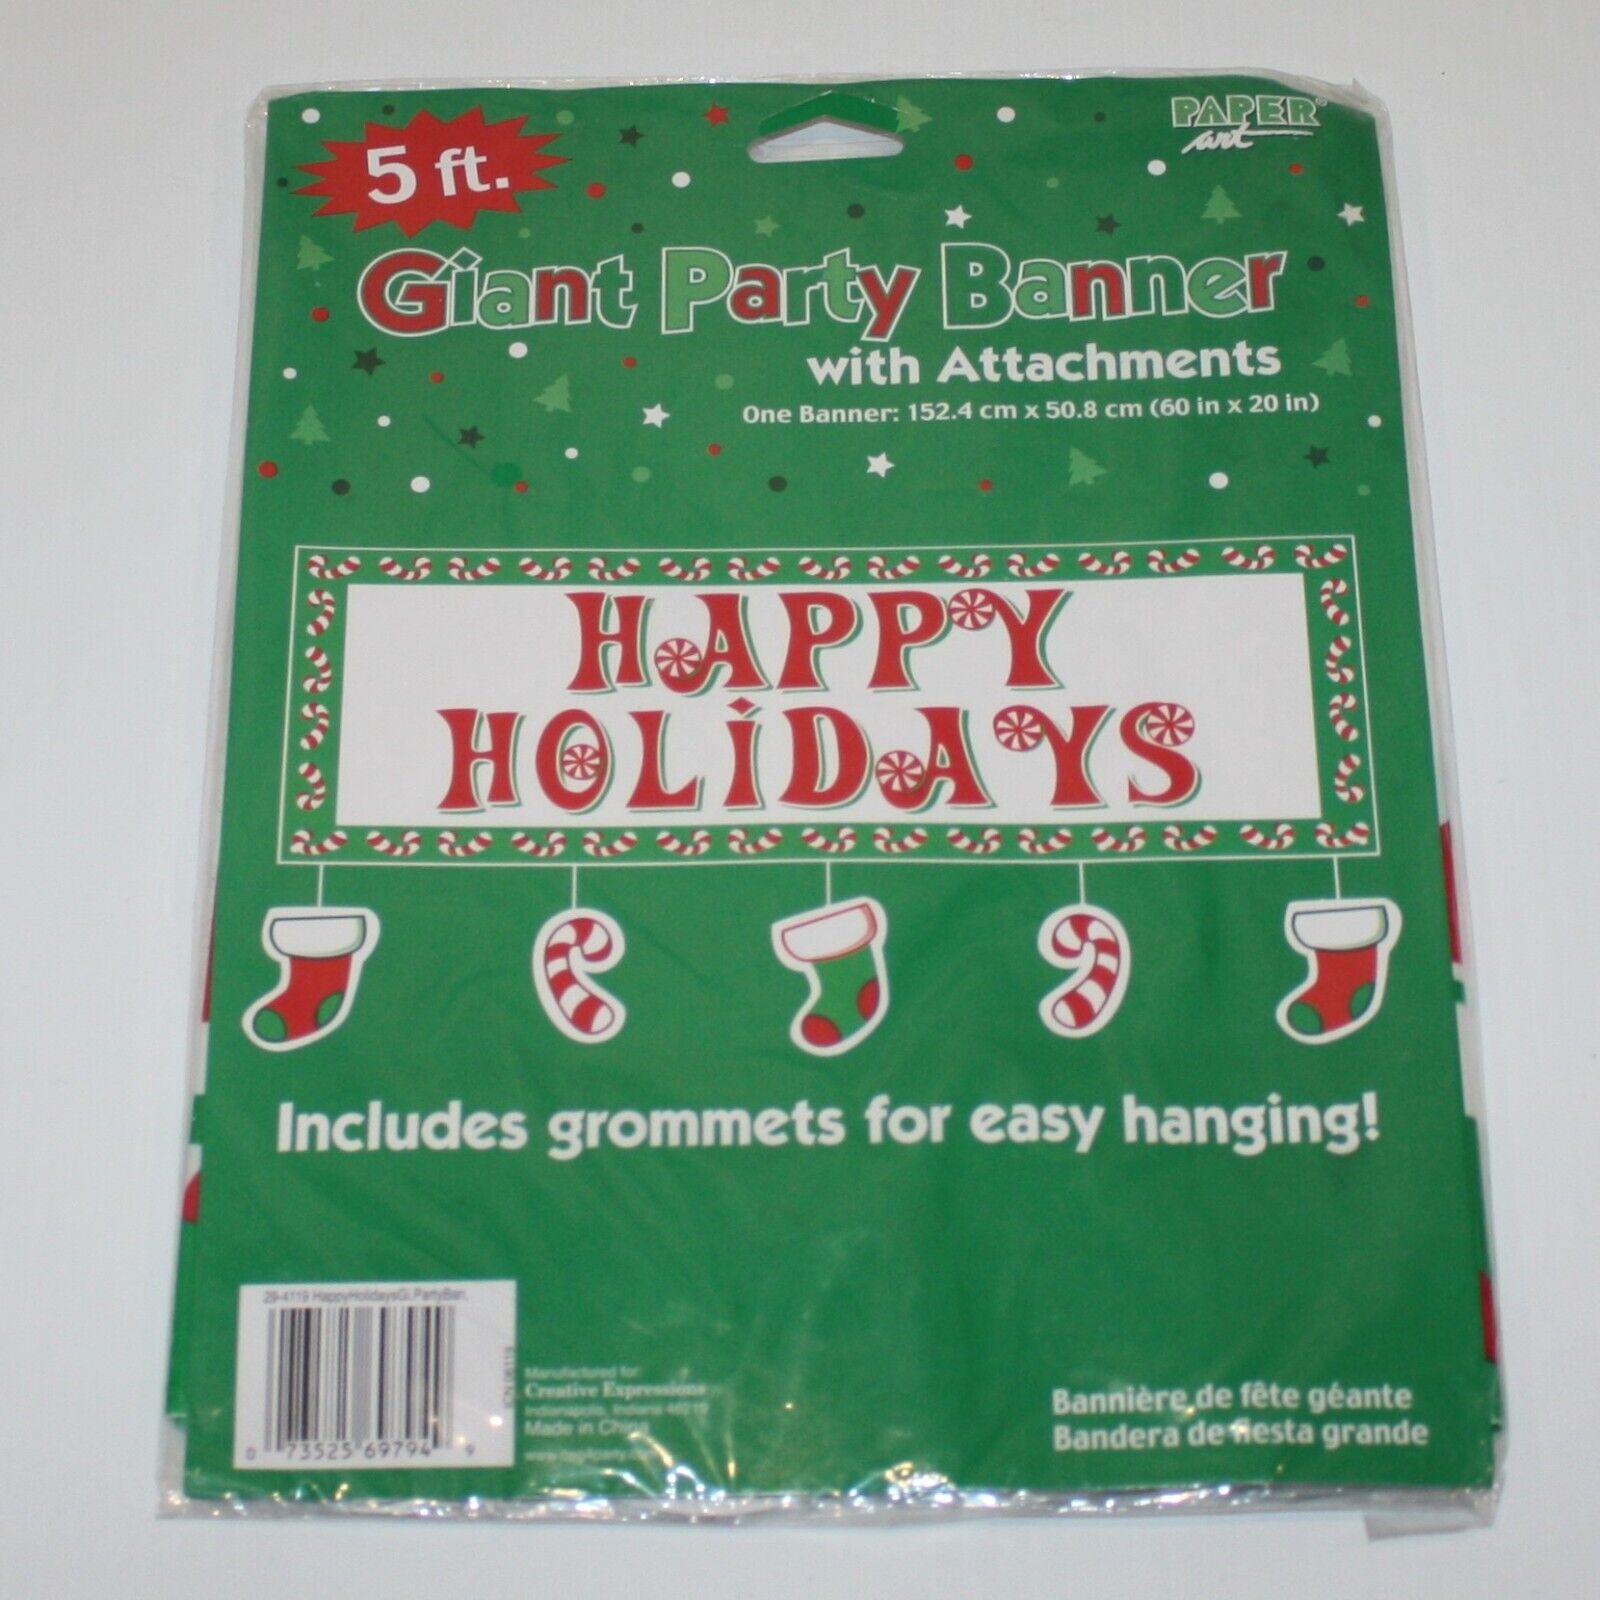 Paper Art Happy Holidays Giant Party Banner with Attachments New in Package - $5.99